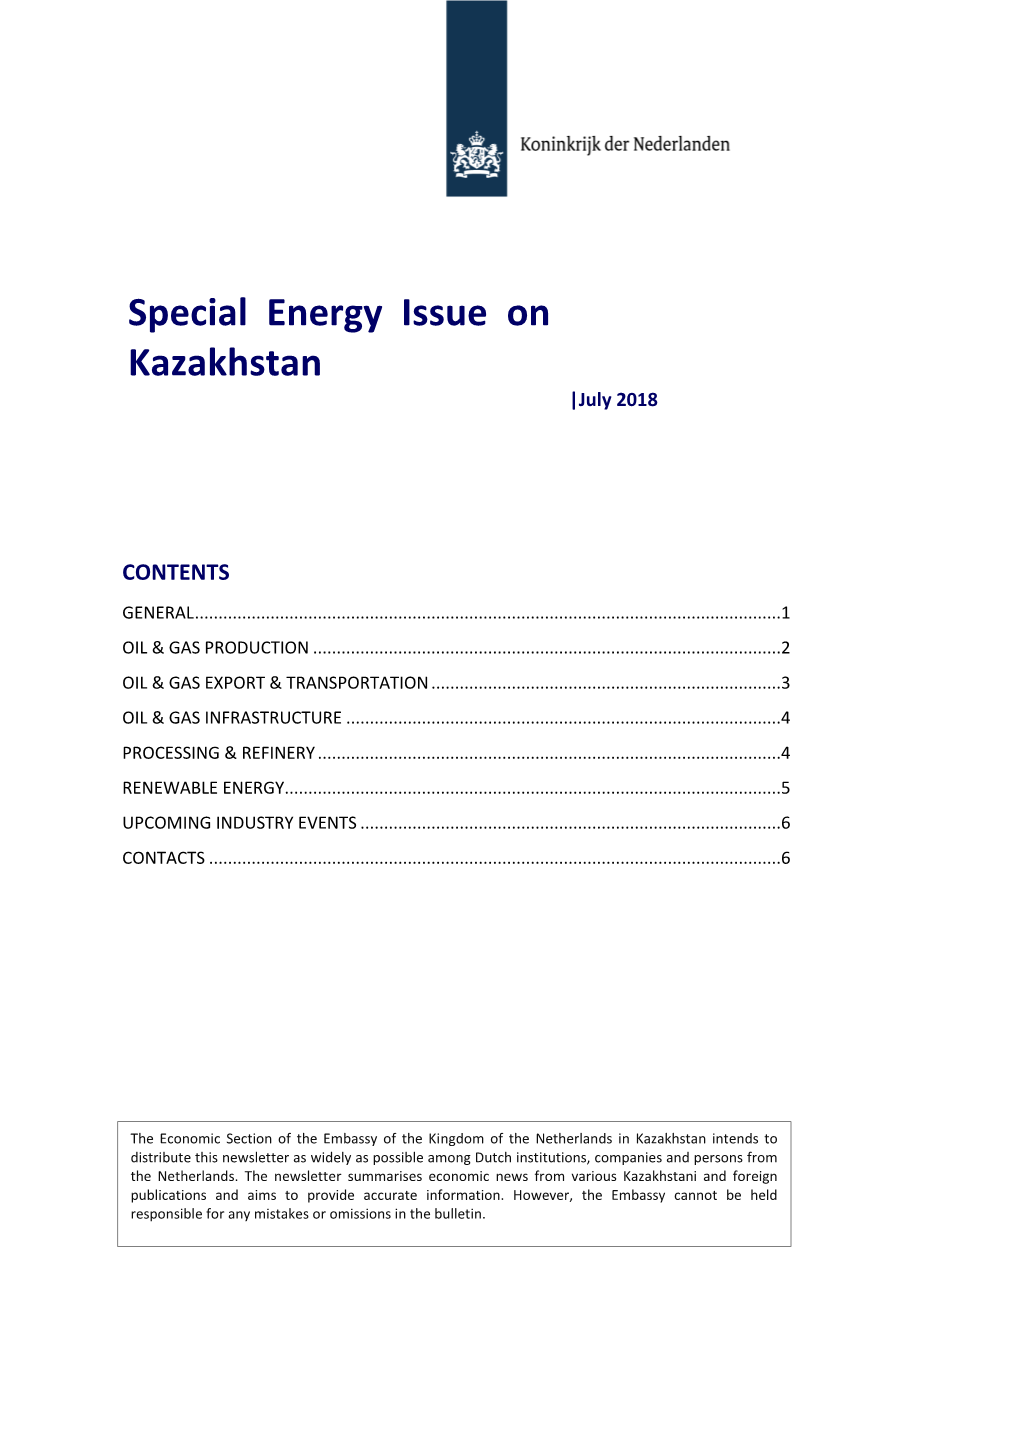 Special Energy Issue on Kazakhstan |July 2018